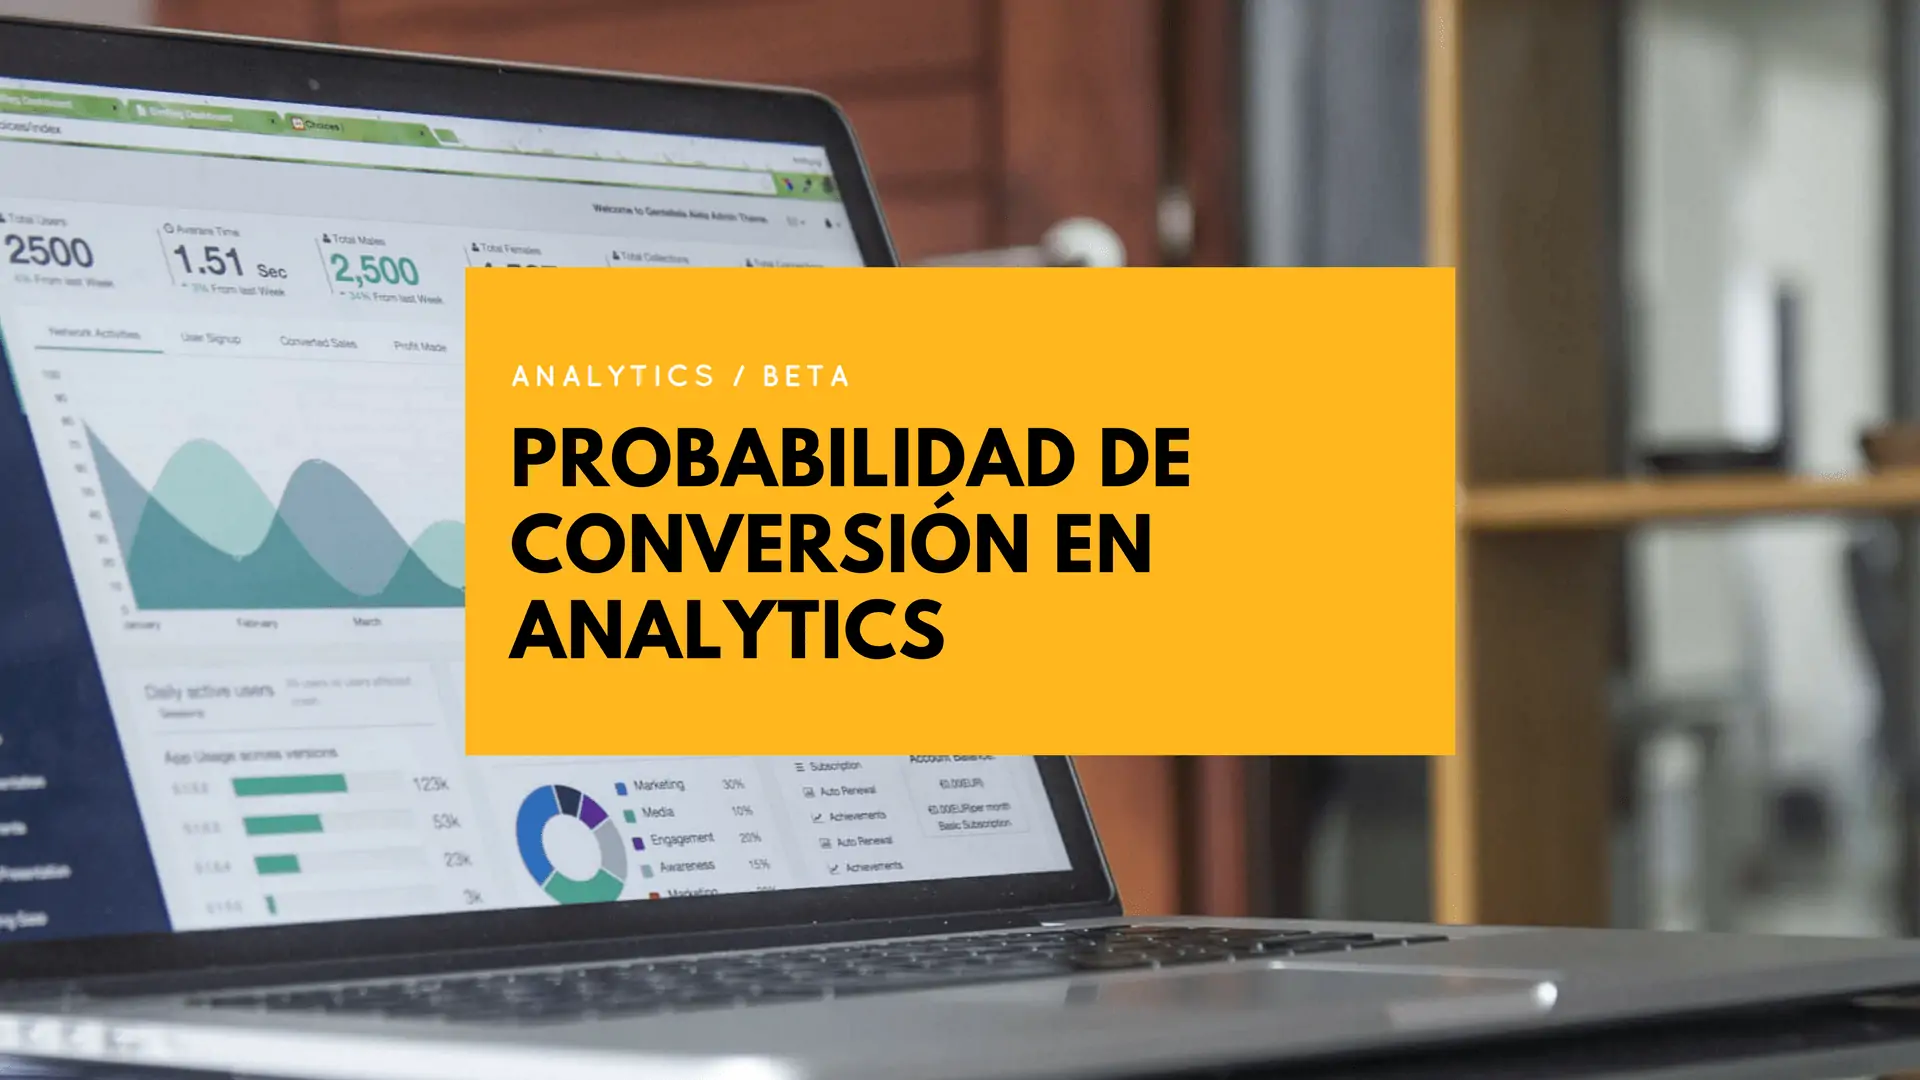 Conversion probability in Analytics